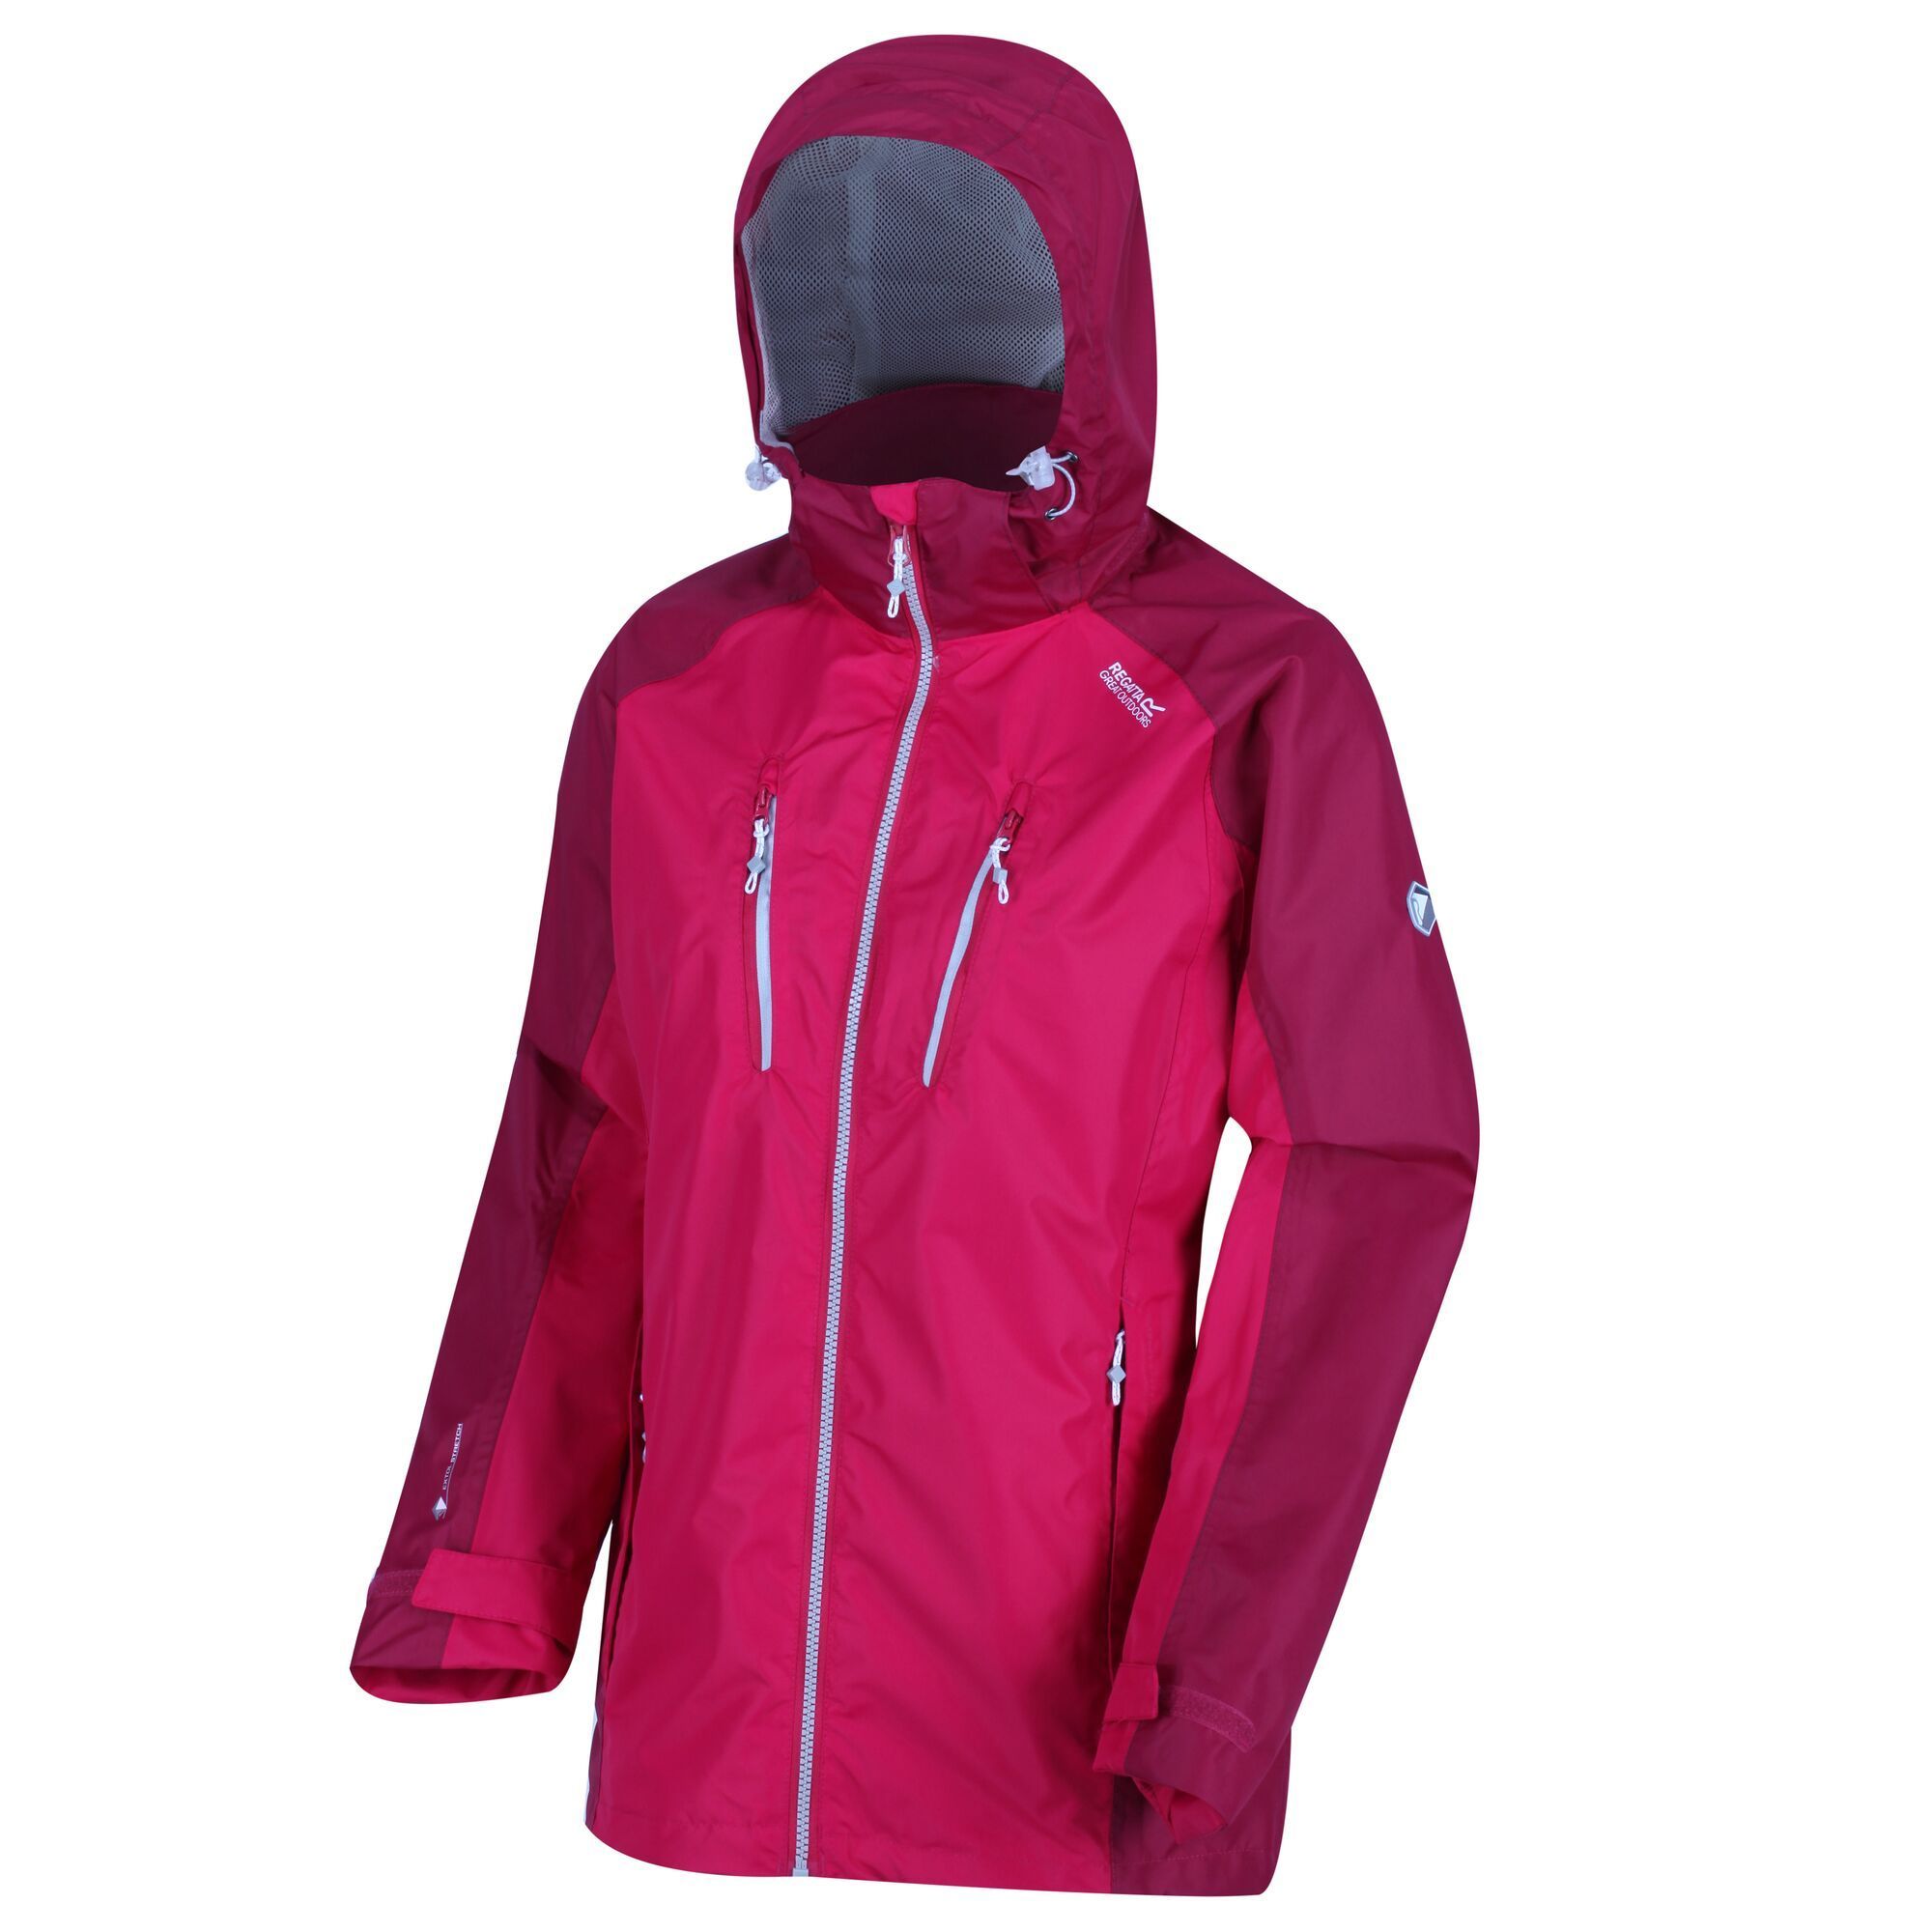 100% polyester. Waterproof and breathable Isotex 5000 coated polyester fabric. Durable water repellent finish. Taped seams. Part mesh part polyester taffeta lining. Concealed hood with adjusters.